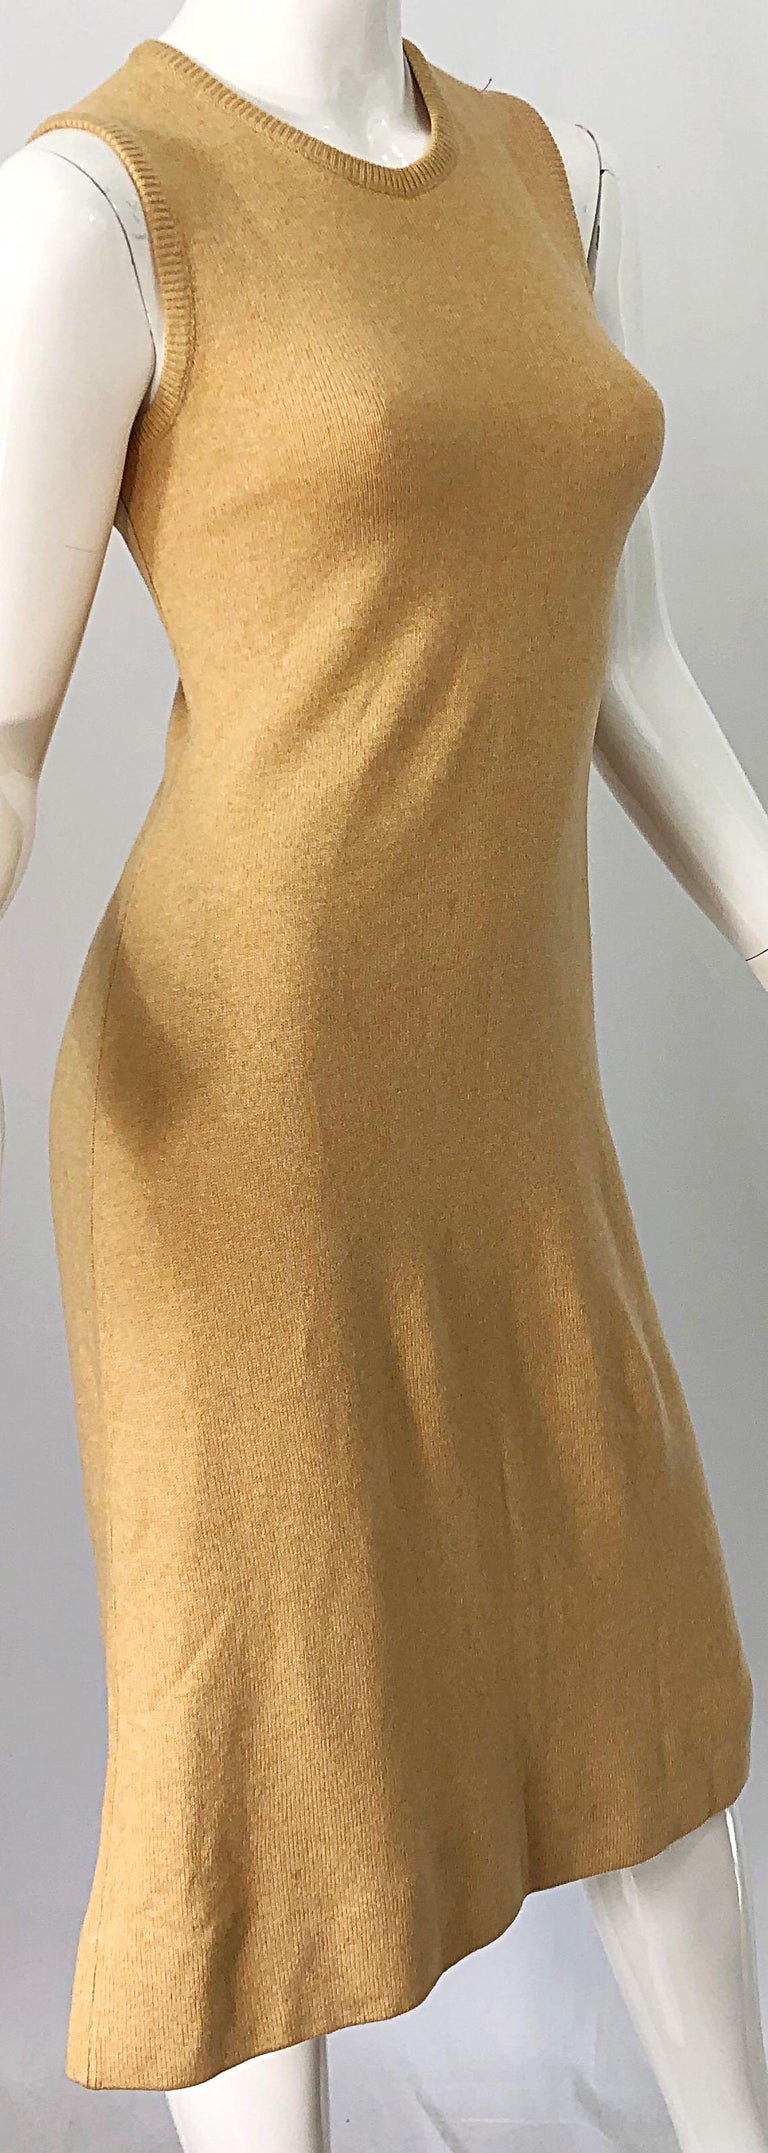 1970s HALSTON Cashmere Camel Tan 70s Vintage Dress and Cardigan Sweater Jacket For Sale 5